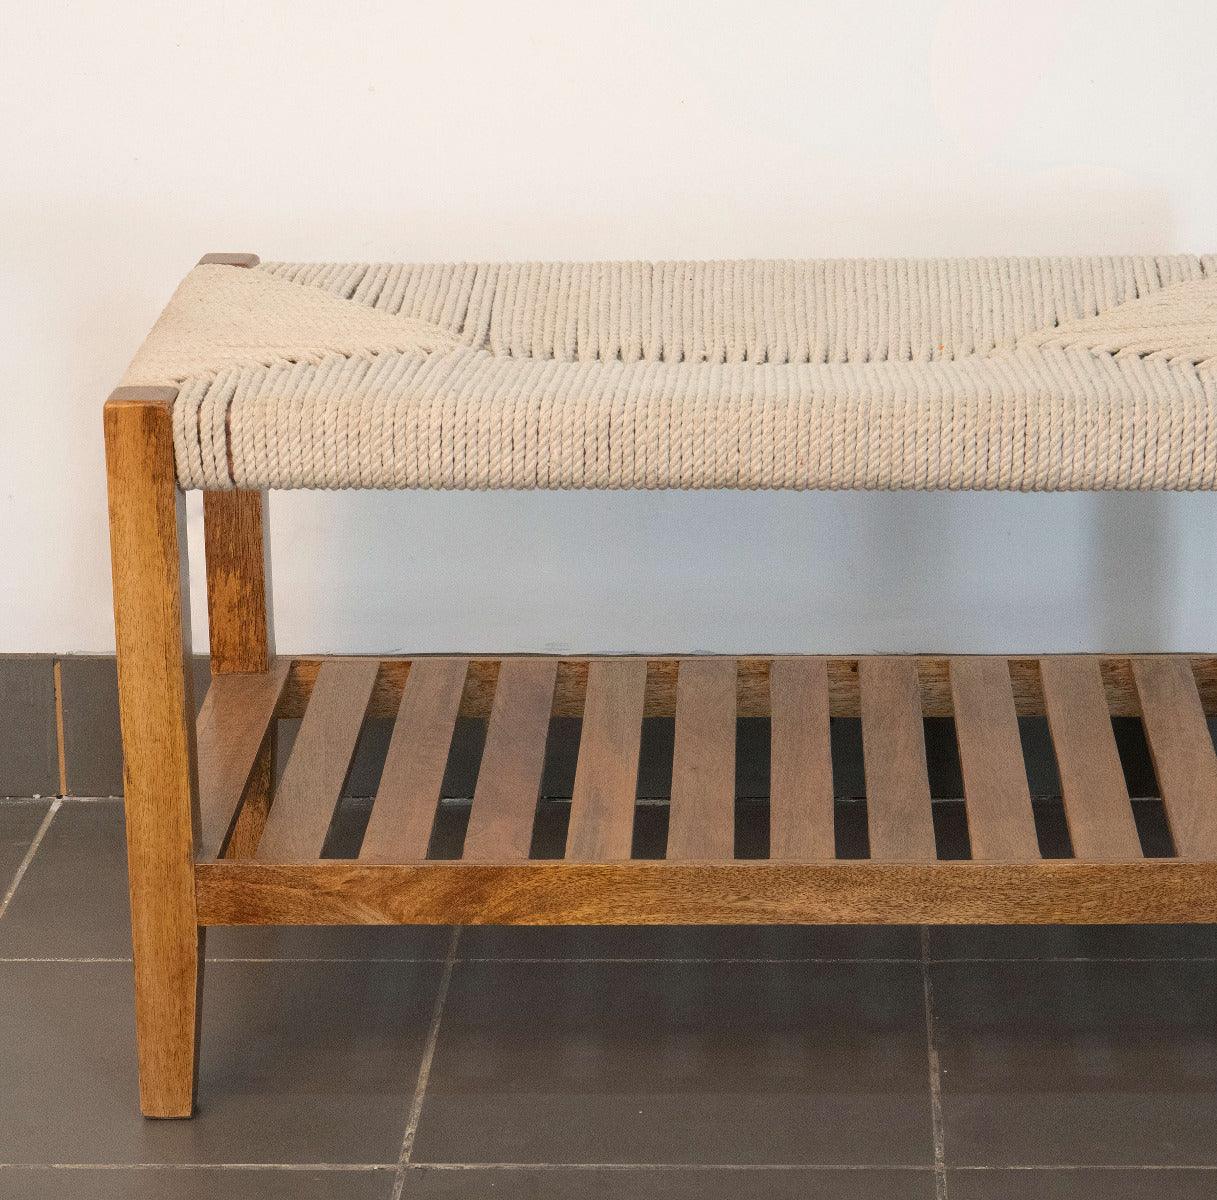 Twine Wooden Bench with Rack (White)